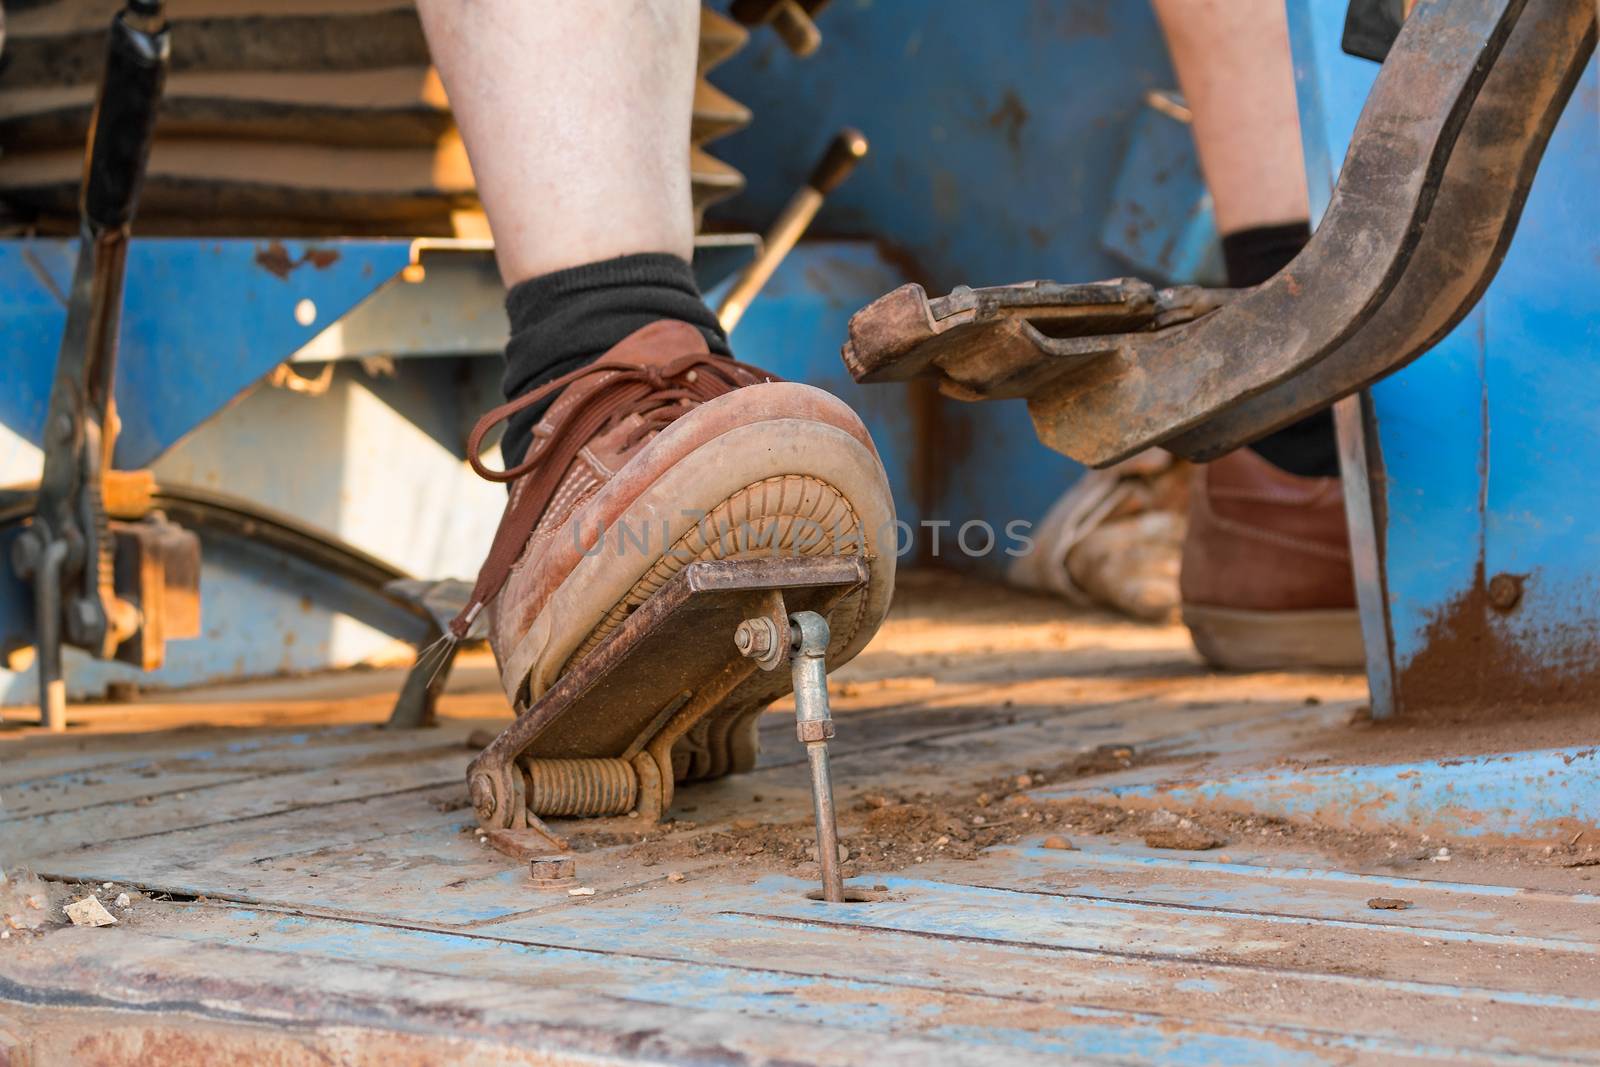 Human foot on the pedal of a tractor